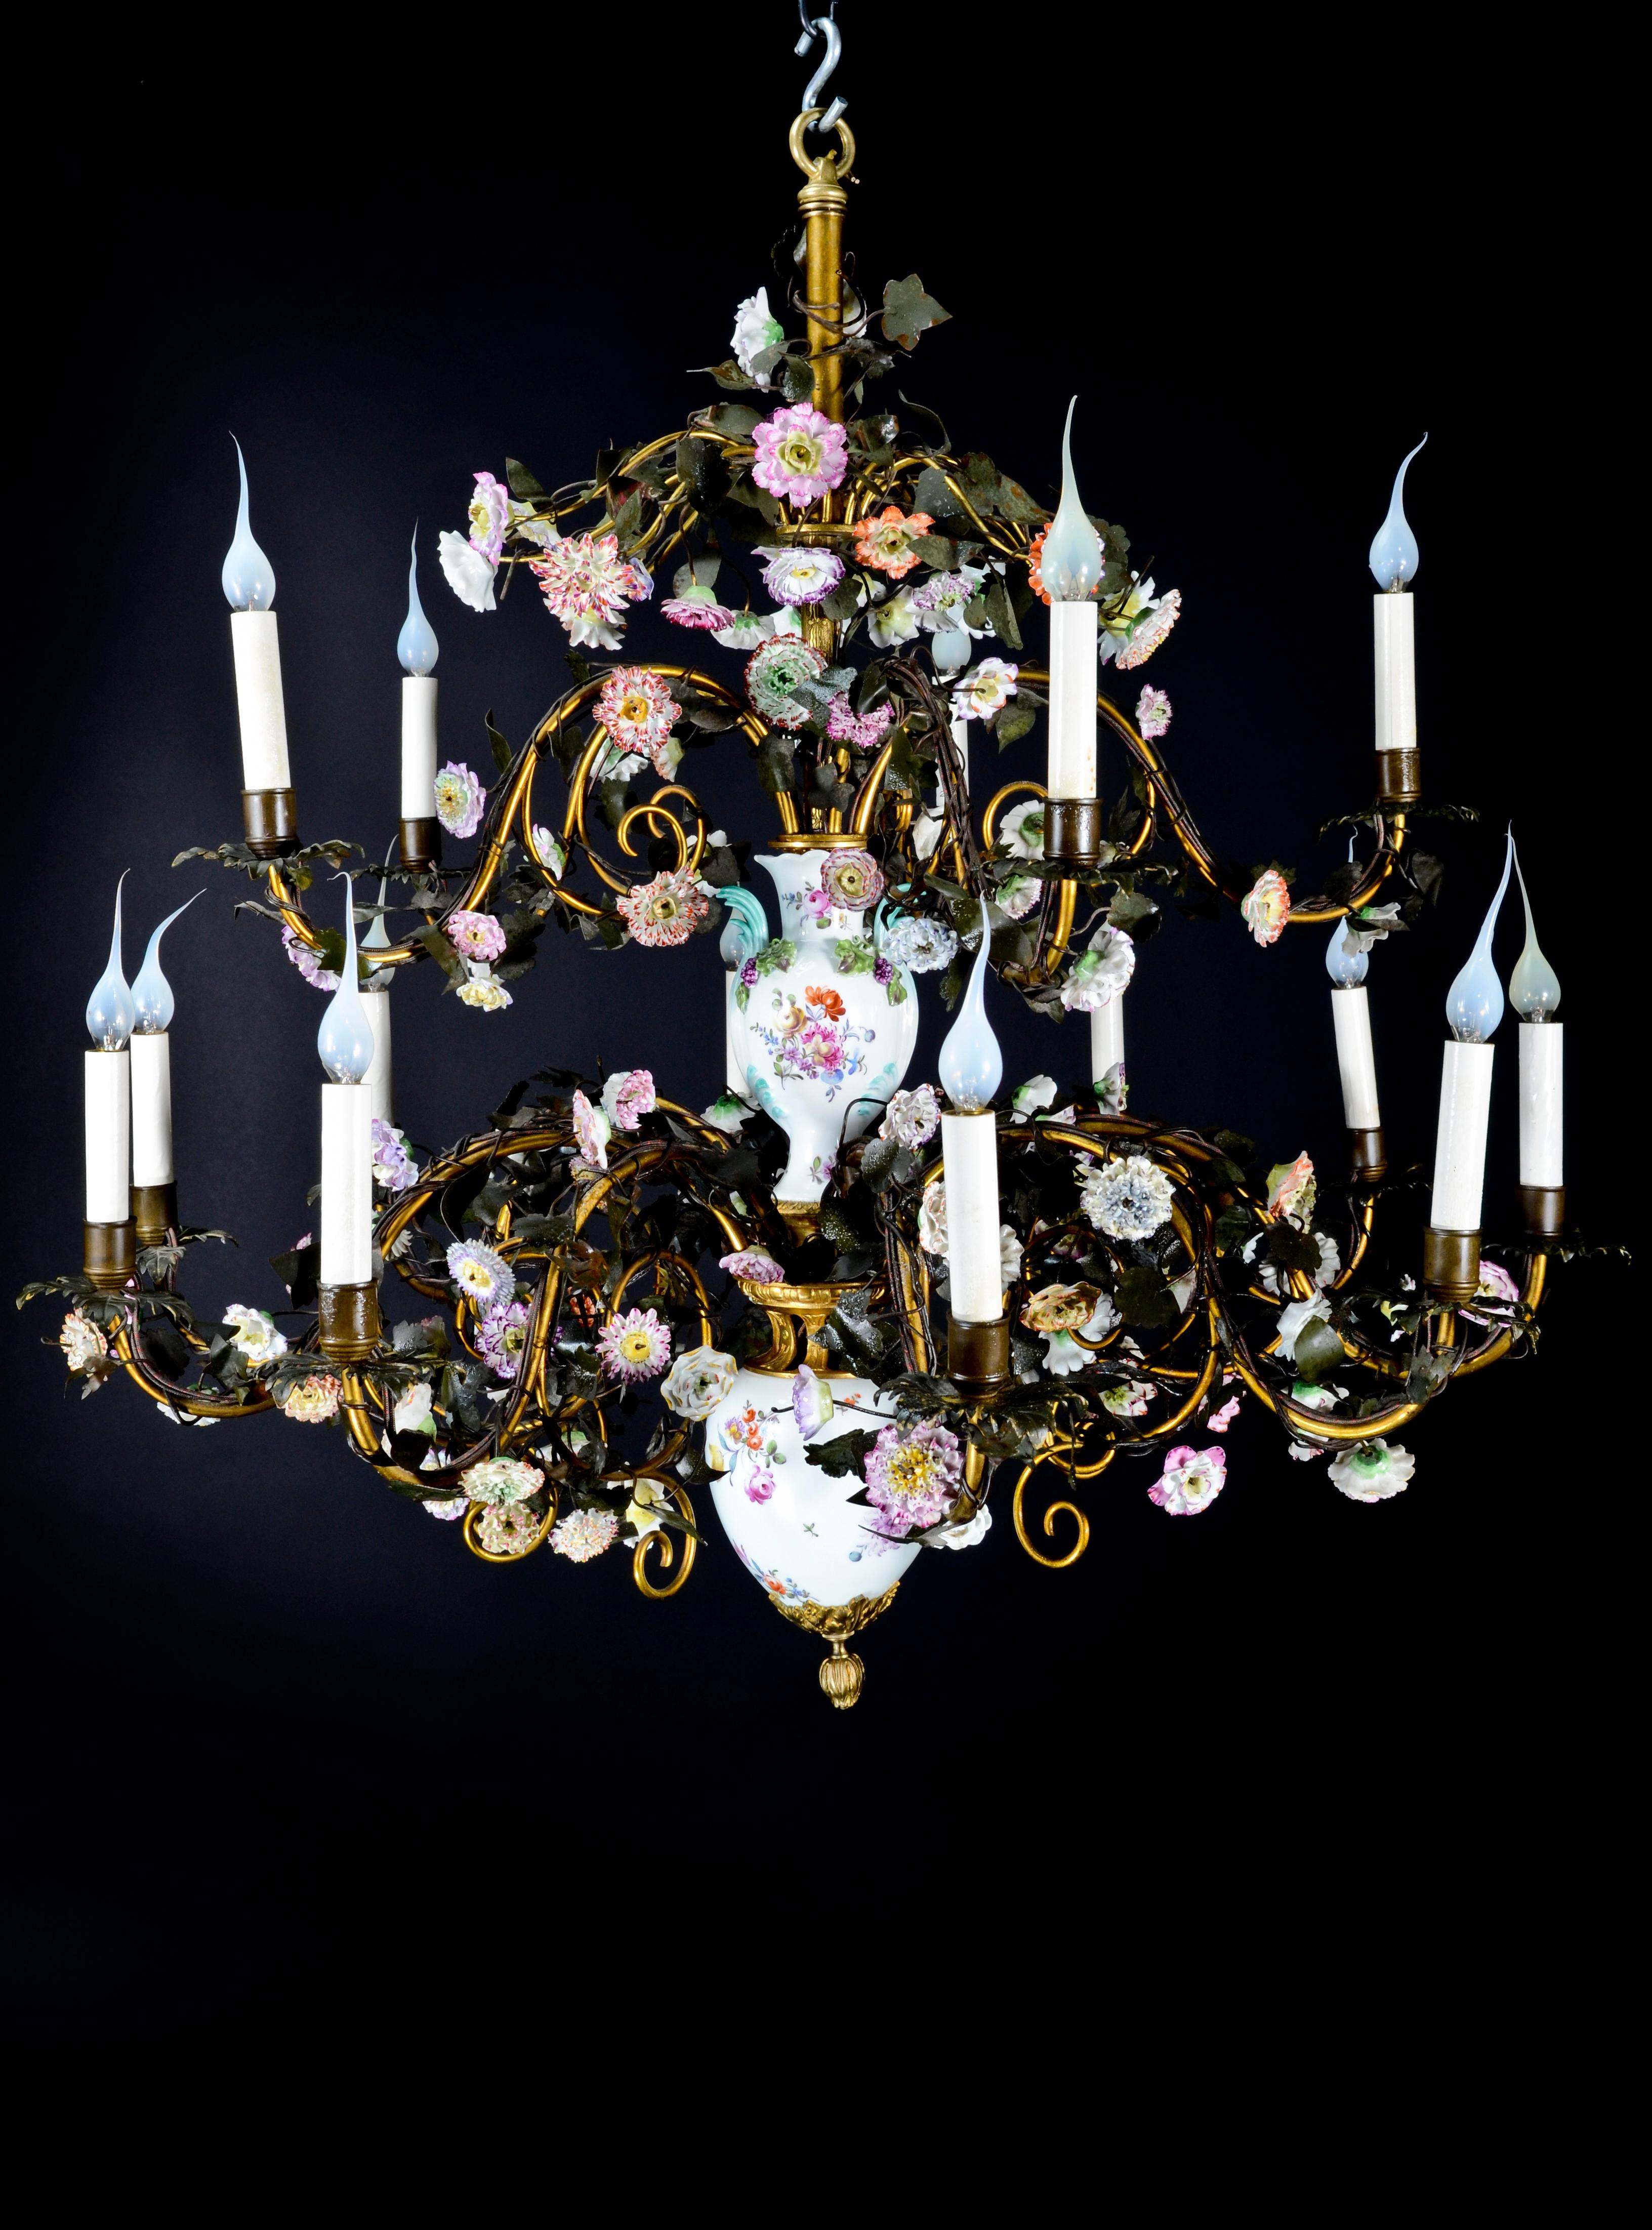 A spectacular and highly important large antique German Louis XVI style Meissen porcelain, gilt bronze and patinated tole multi light double tier chandelier of superb craftsmanship embellished with hand painted polychromed enameled porcelain flowers.